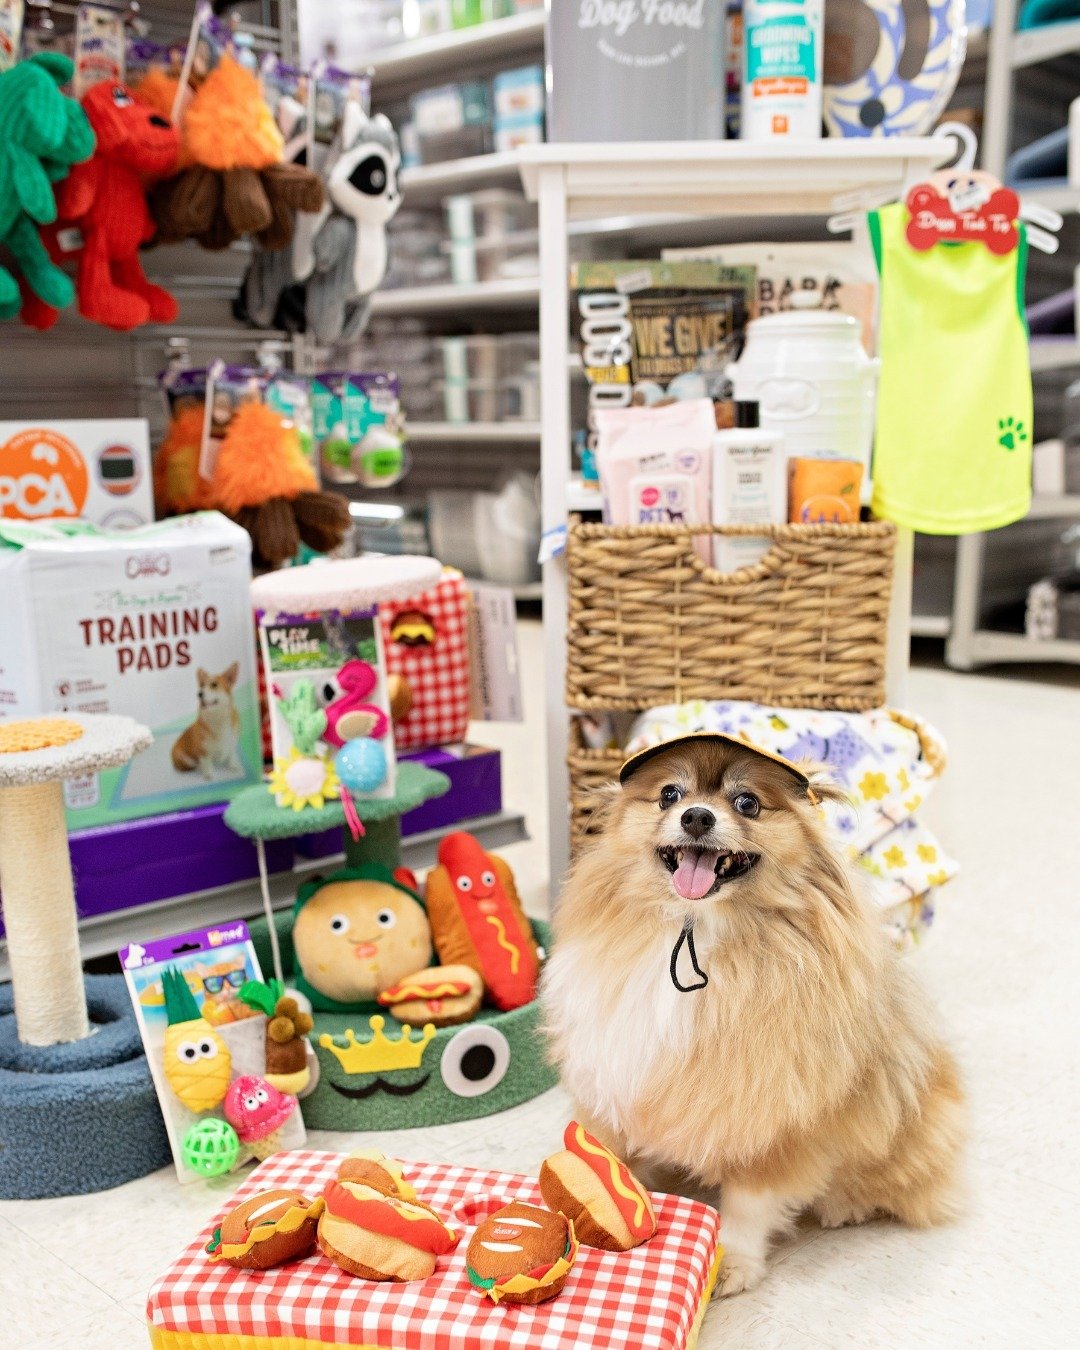 These deals: Pup-approved! 🐾 Fill your cart with five-paw finds for summertime. 🛒☀️